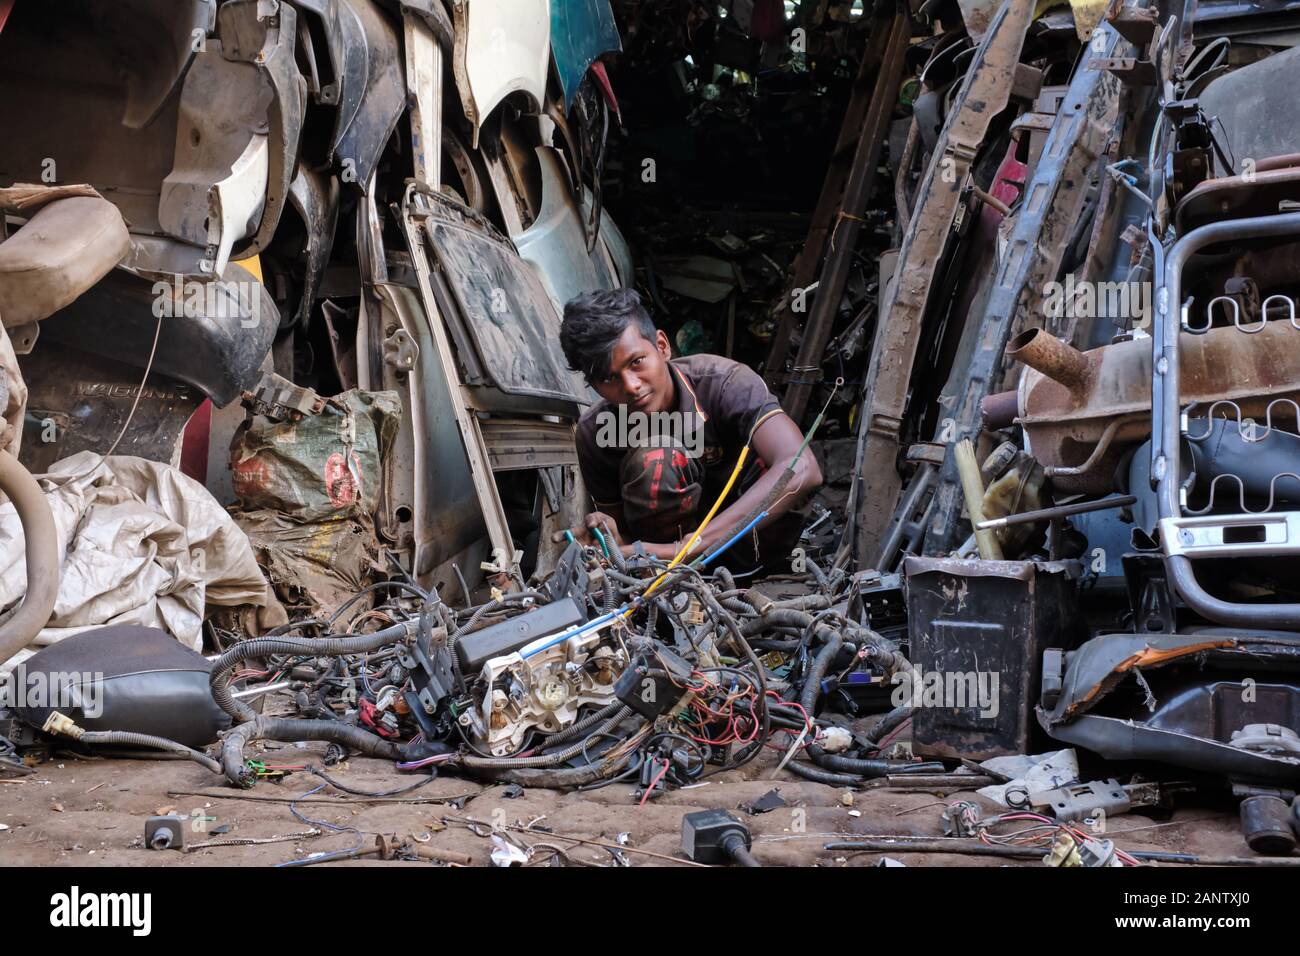 A worker taking apart parts of dismantled old cars at Thieves' Market (Chor Bazar) in Mumbai, India, surrounded by a mountain of old car parts Stock Photo